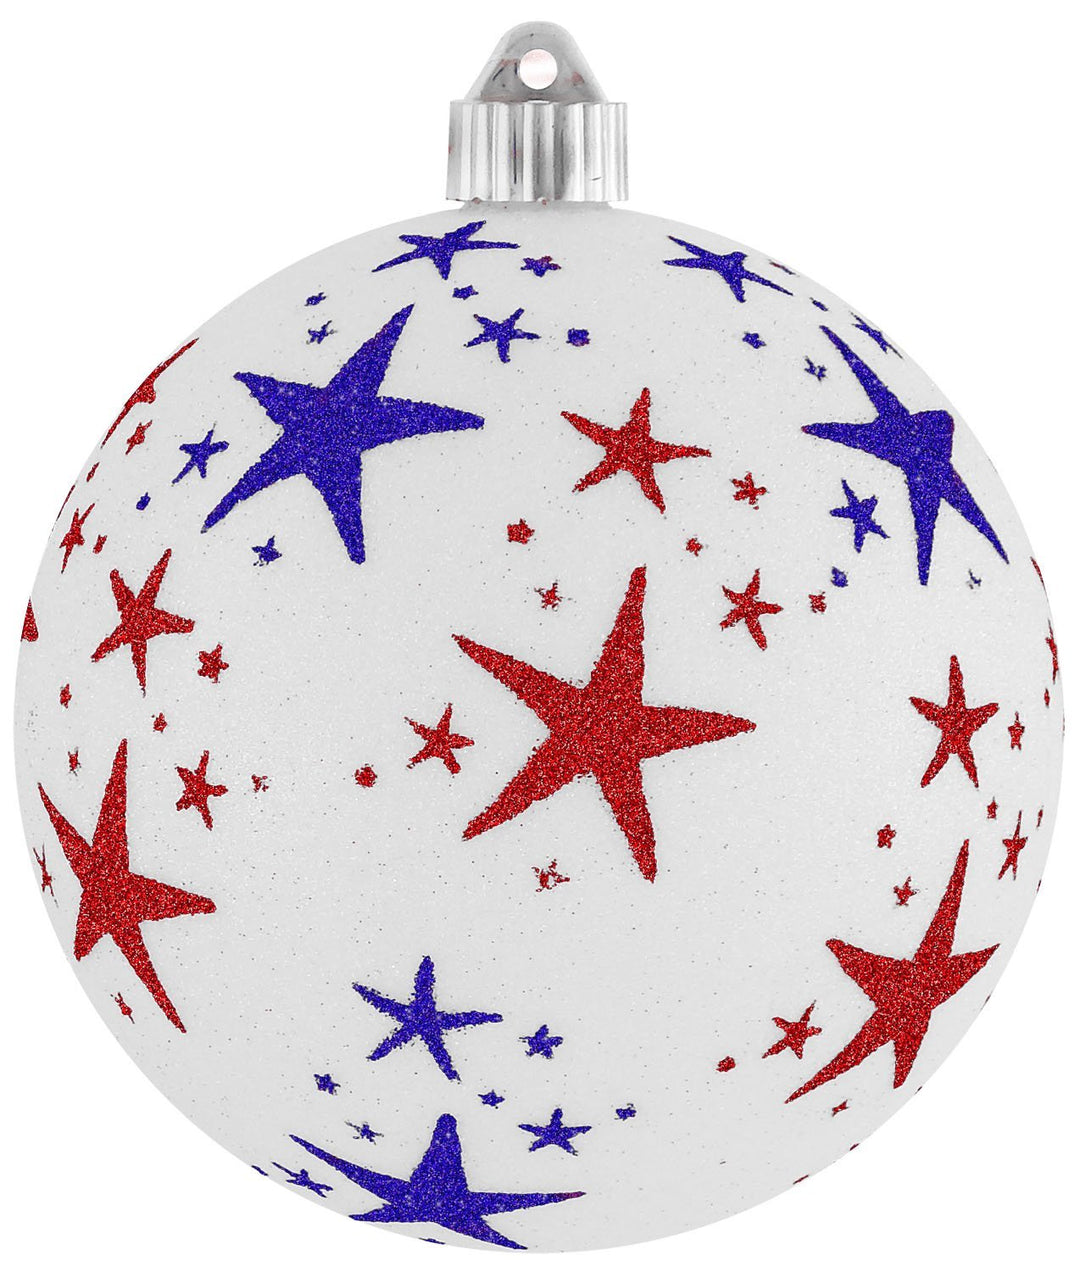 6" (150mm) Snowball Glitter with Red/Blue Stars Large Christmas Ornaments